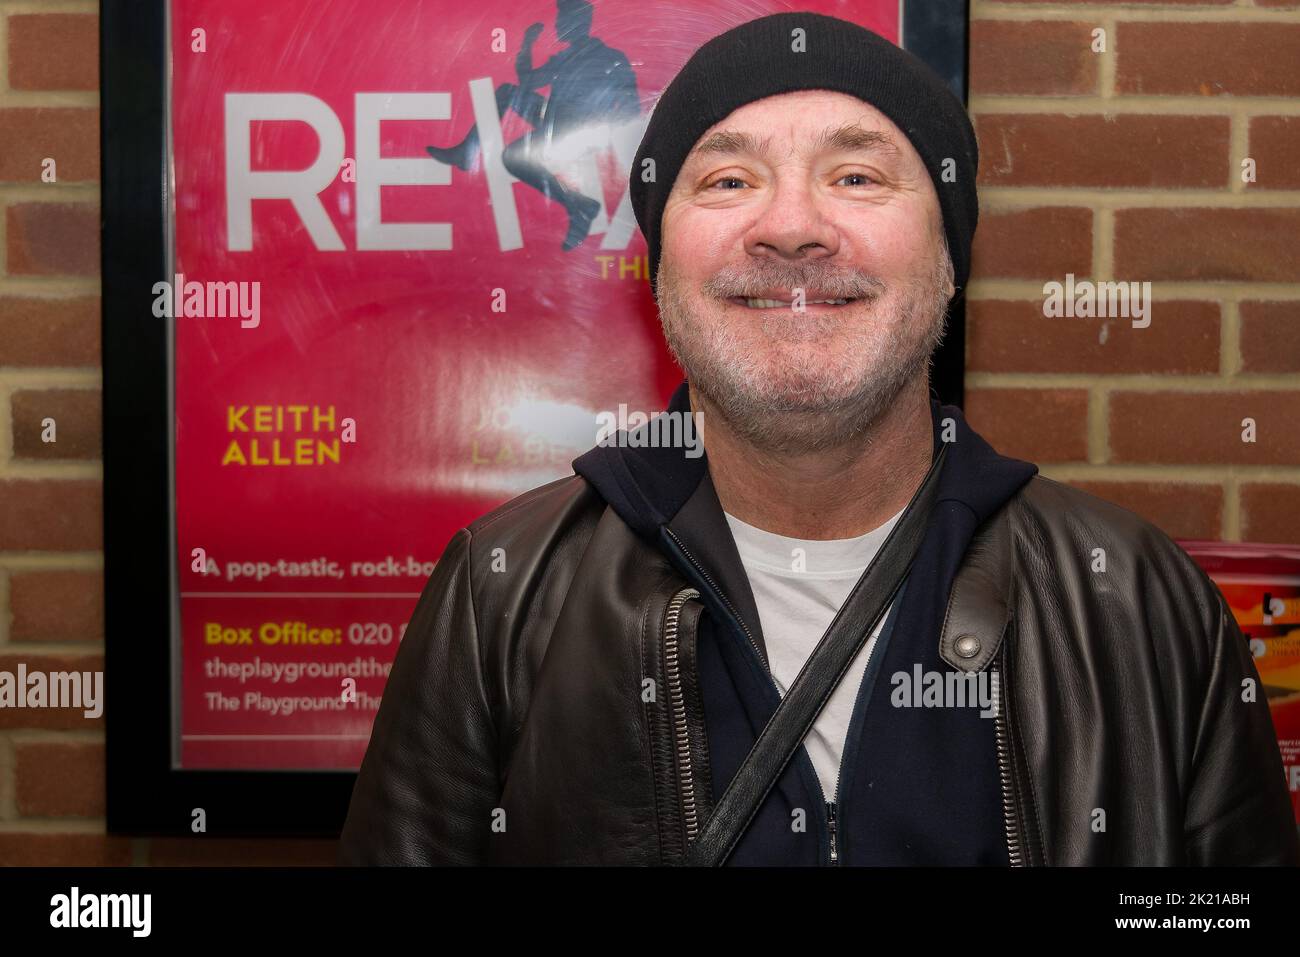 Artist Damien Hirst smiles for the camera as he arrives to the final show of Rehab the musical at the Playground Theatre London. Rehab The Musical, a pop-tactic, rock-bottom-to-redemption journey of the soul starring Keith Allen played at The Playground Theatre in London September the 1st to the 17th.Clive Black for Blacklist Entertainment presents Rehab the musical & the team includes: Book by Elliot Davis, music & lyrics by Grant Black & Murray Lachlan Young, Director & choreographer - Gary Lloyd, Co- Producer Don Black The New Musical attracted some high profile visitors to watch and supp Stock Photo